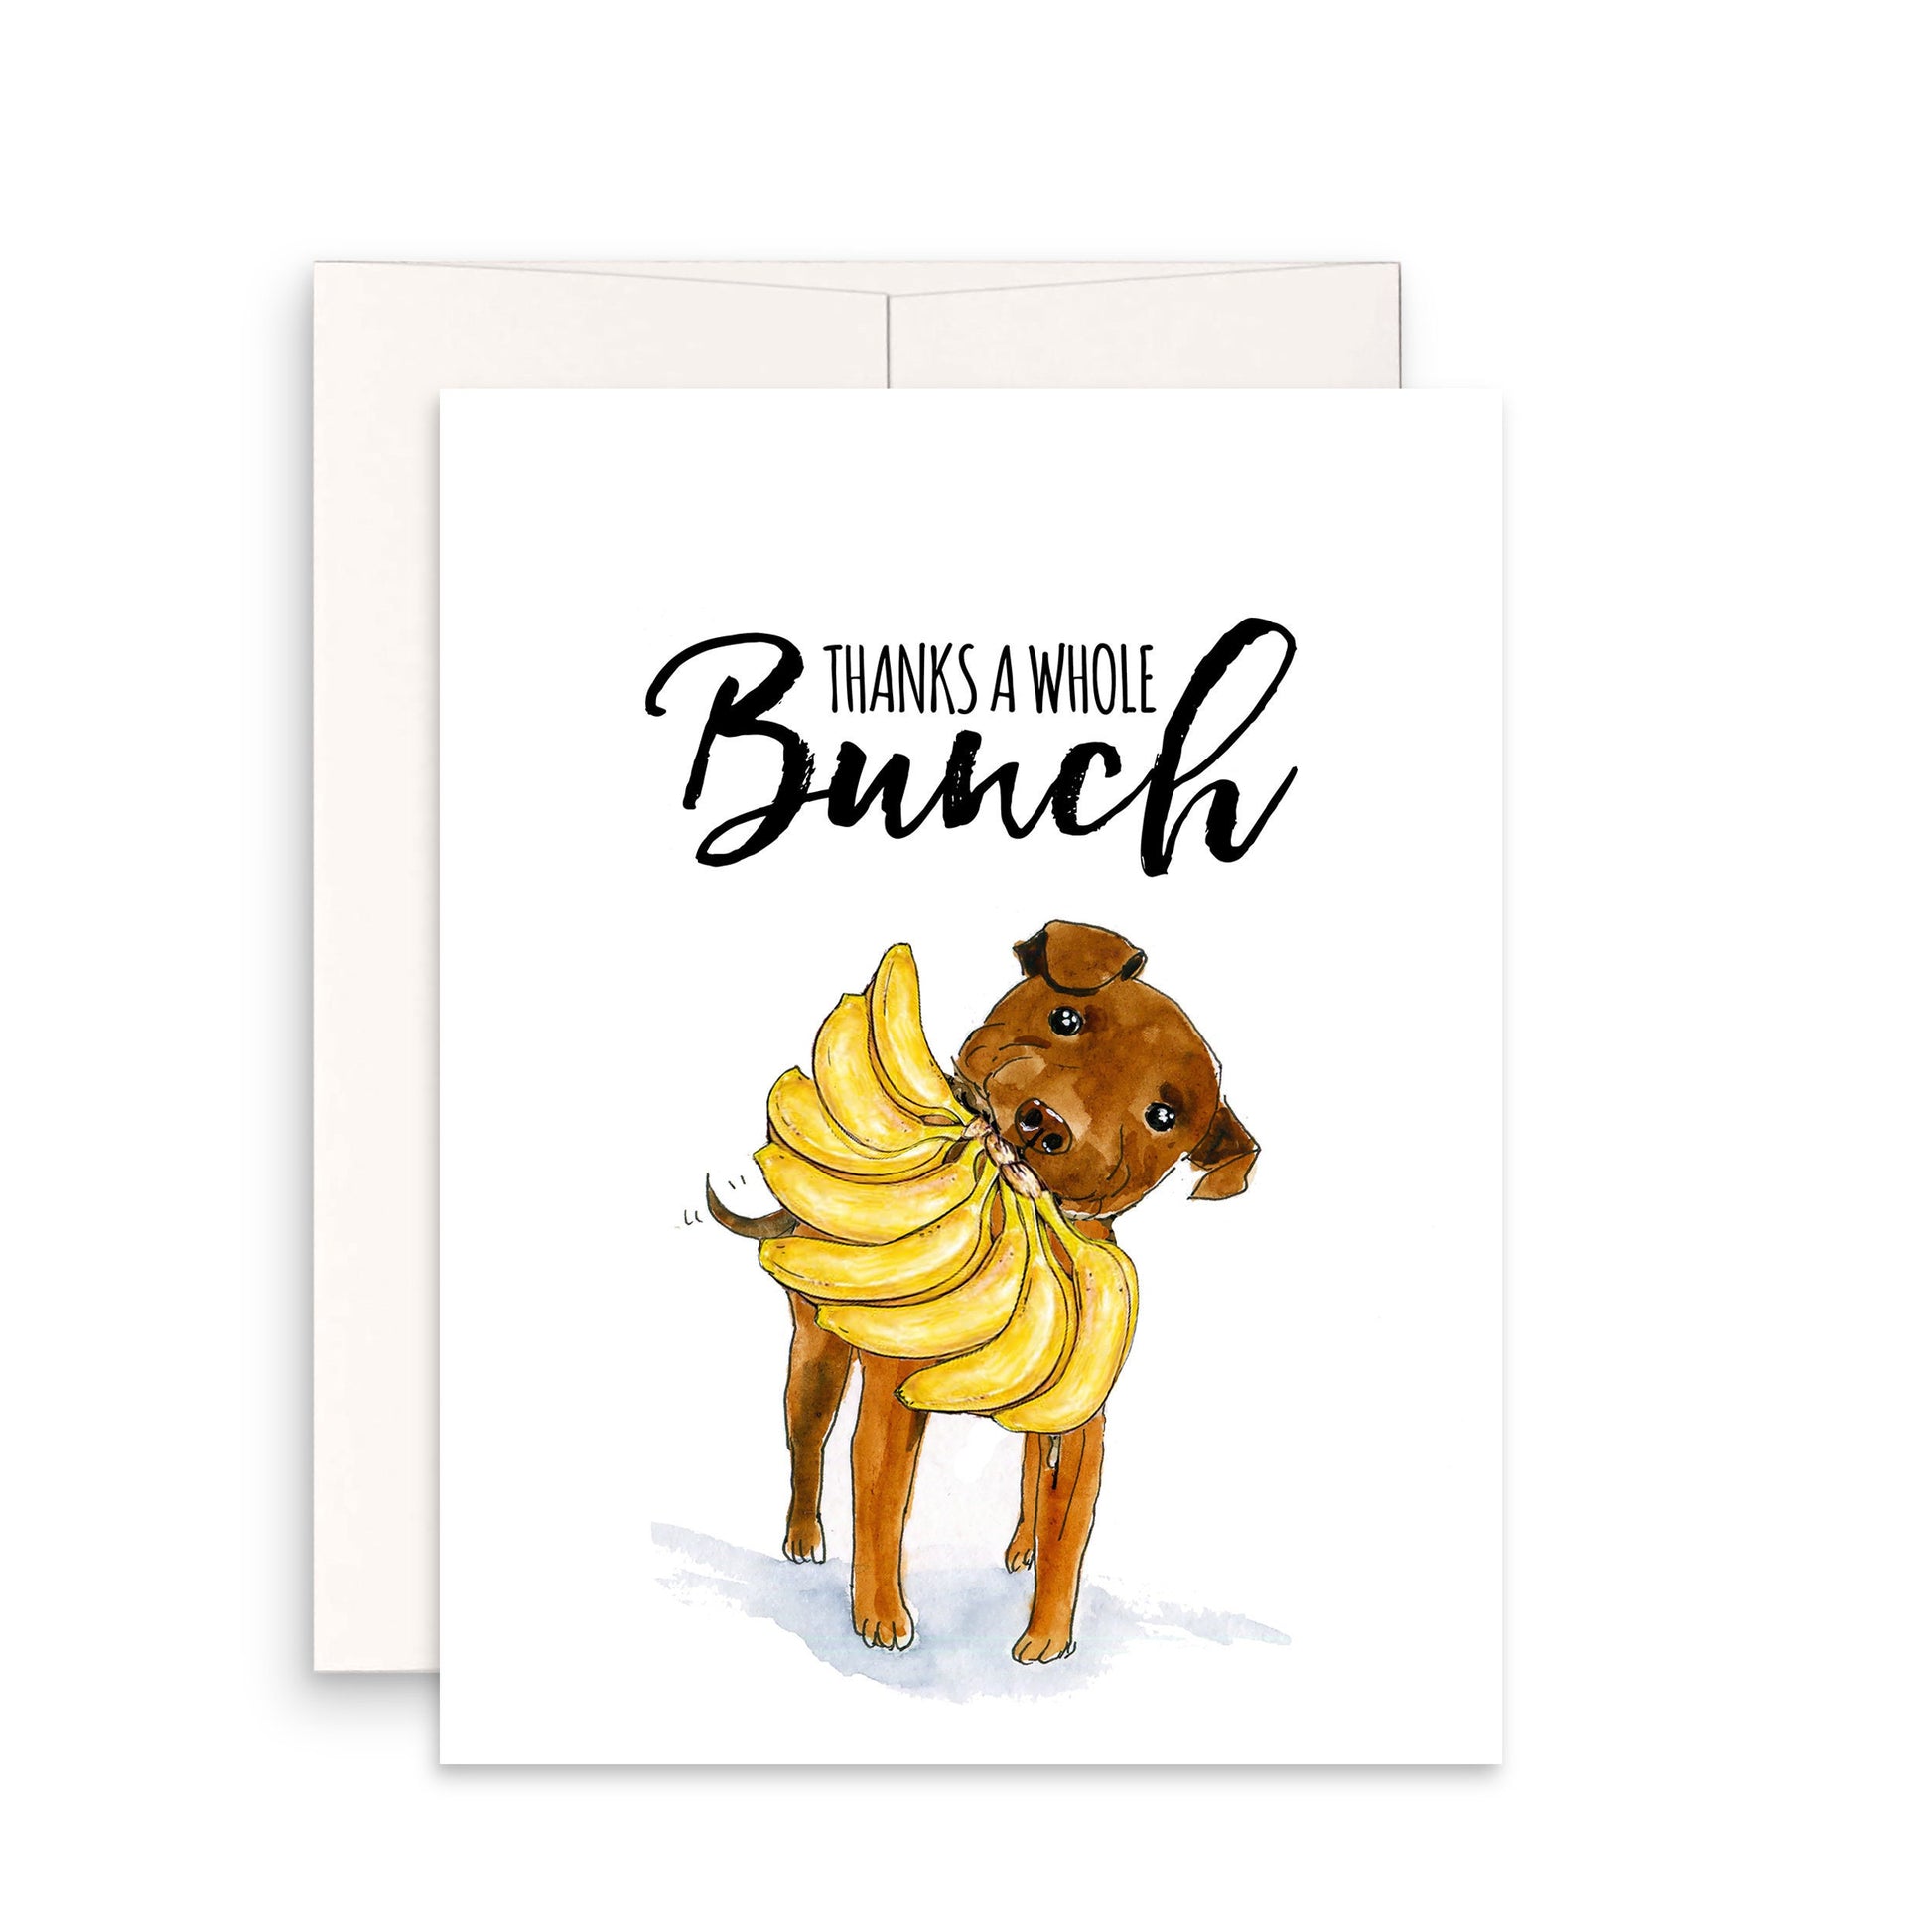 Pitbull Funny Thank You Cards From Dog - Thanks A Whole Banana Bunch